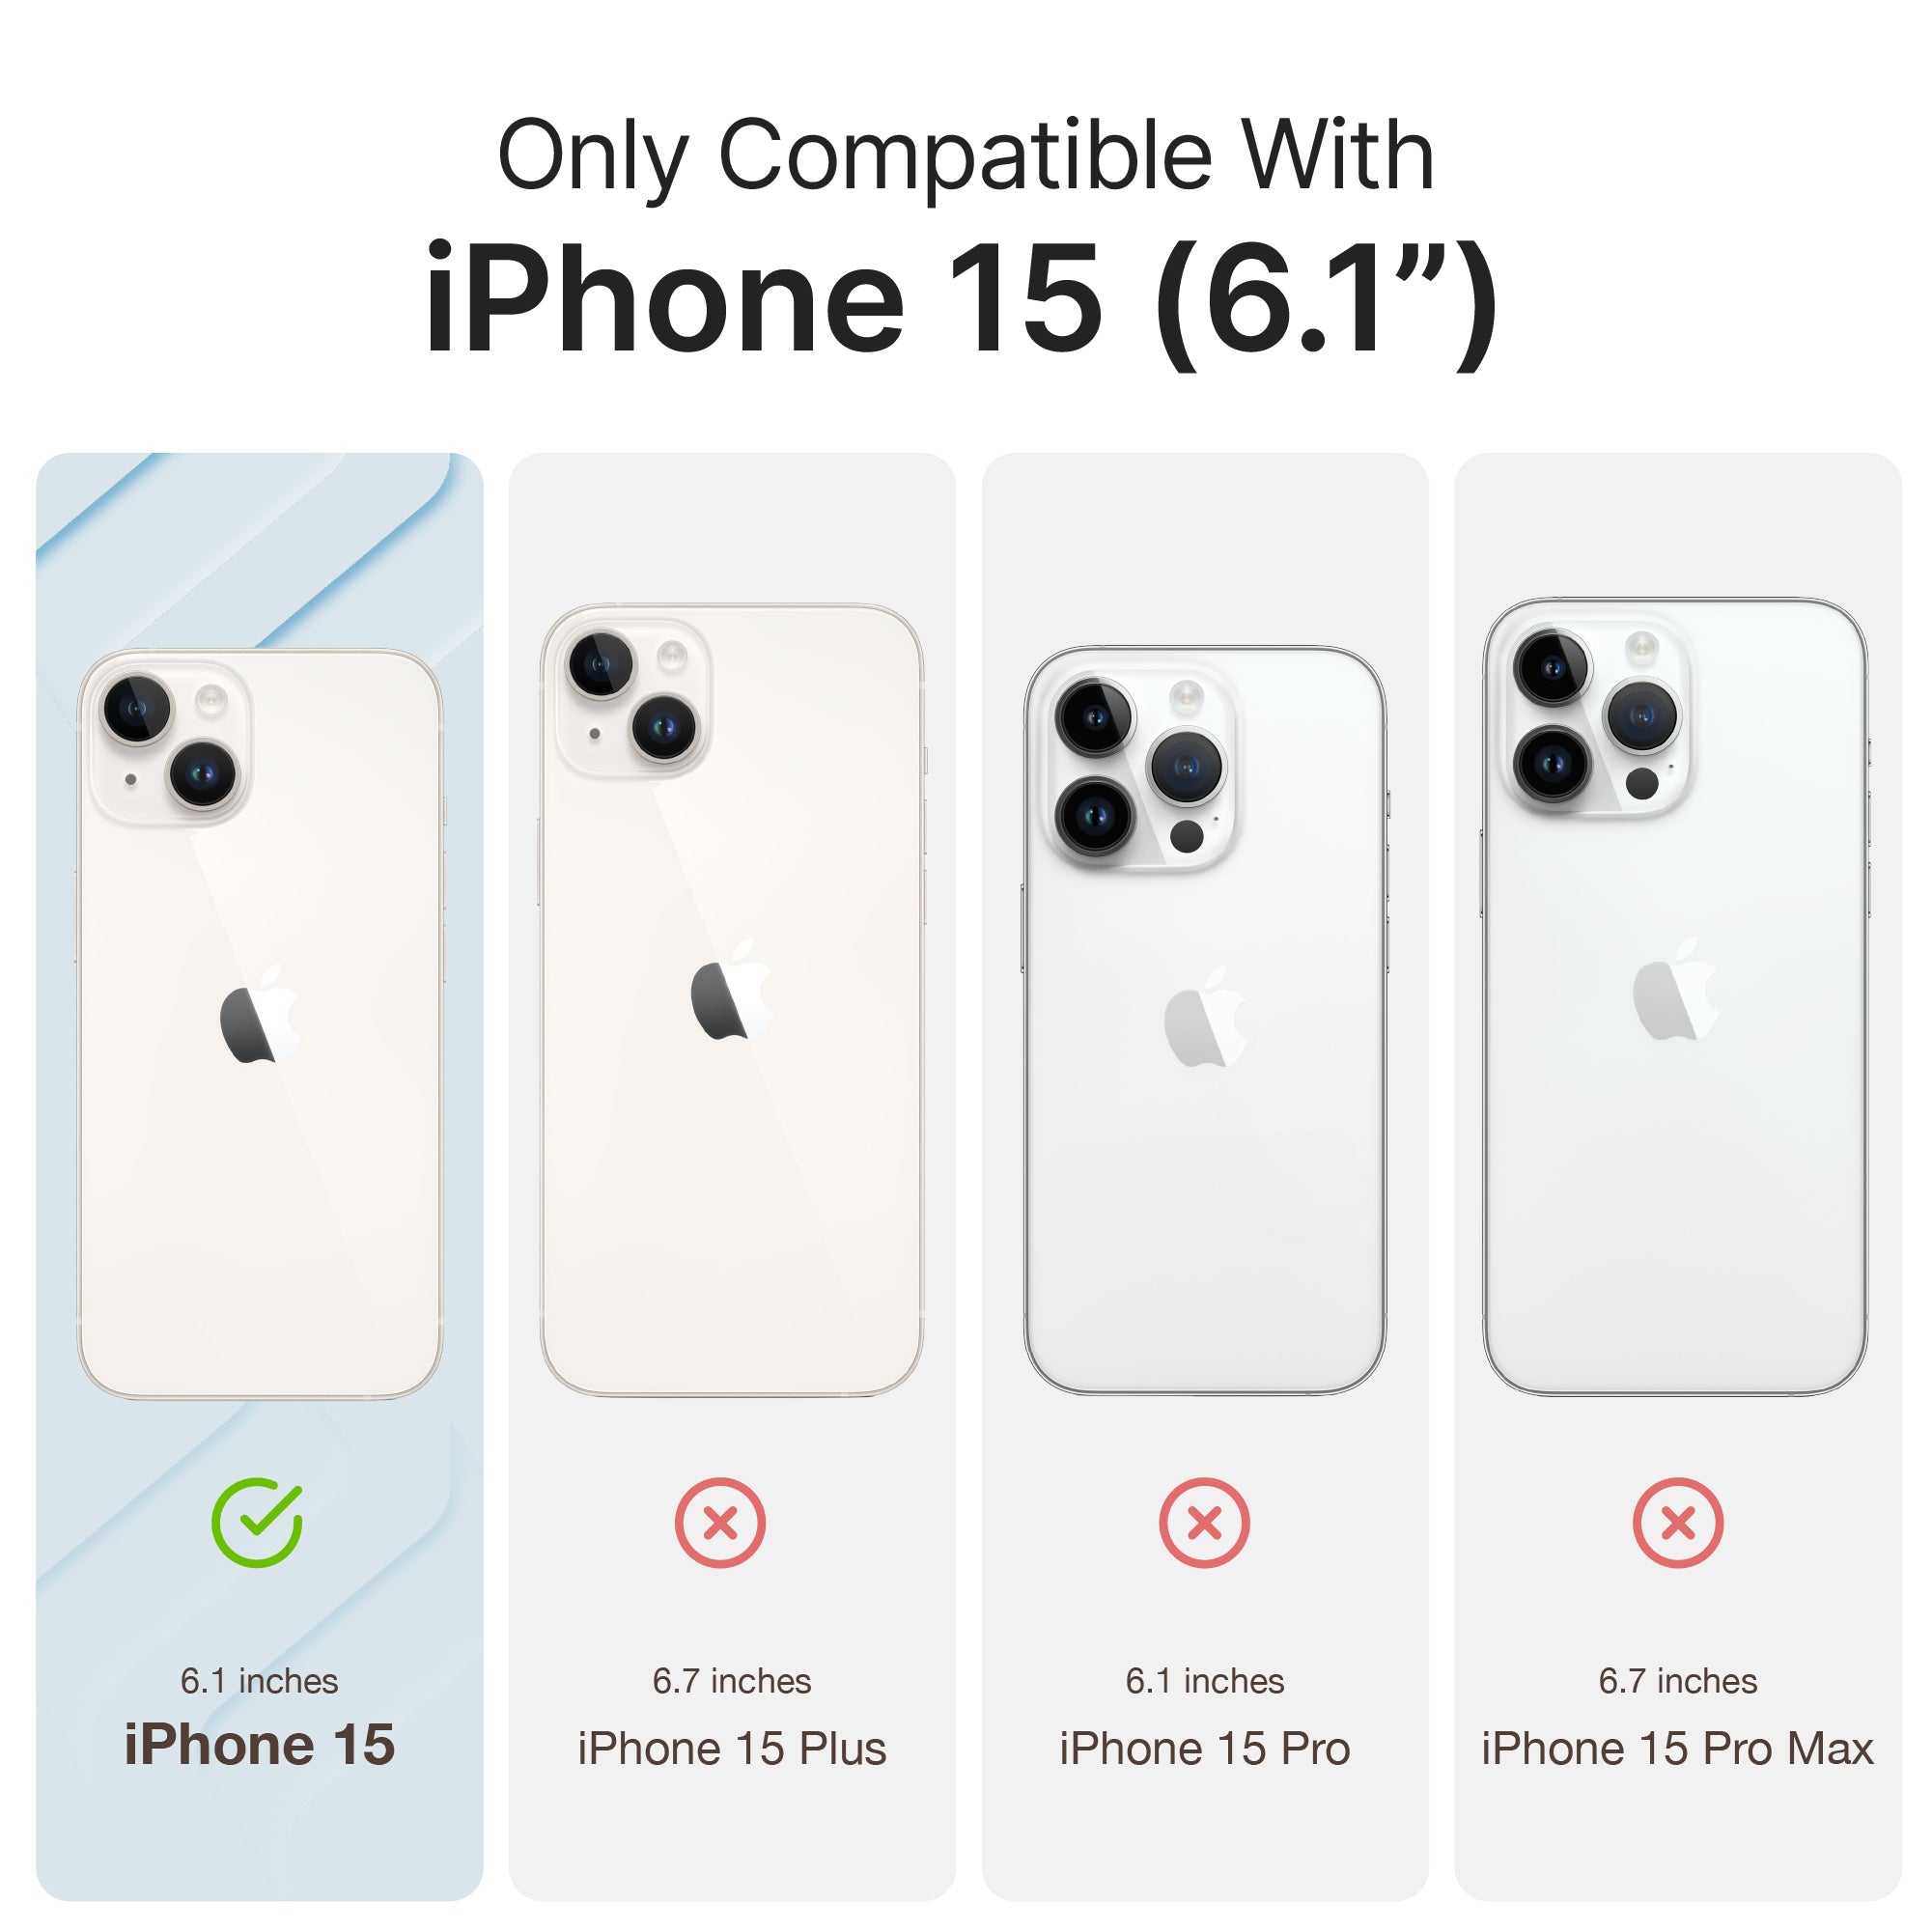 iPhone 15 Plus vs iPhone 15: It's all about that size, size, size